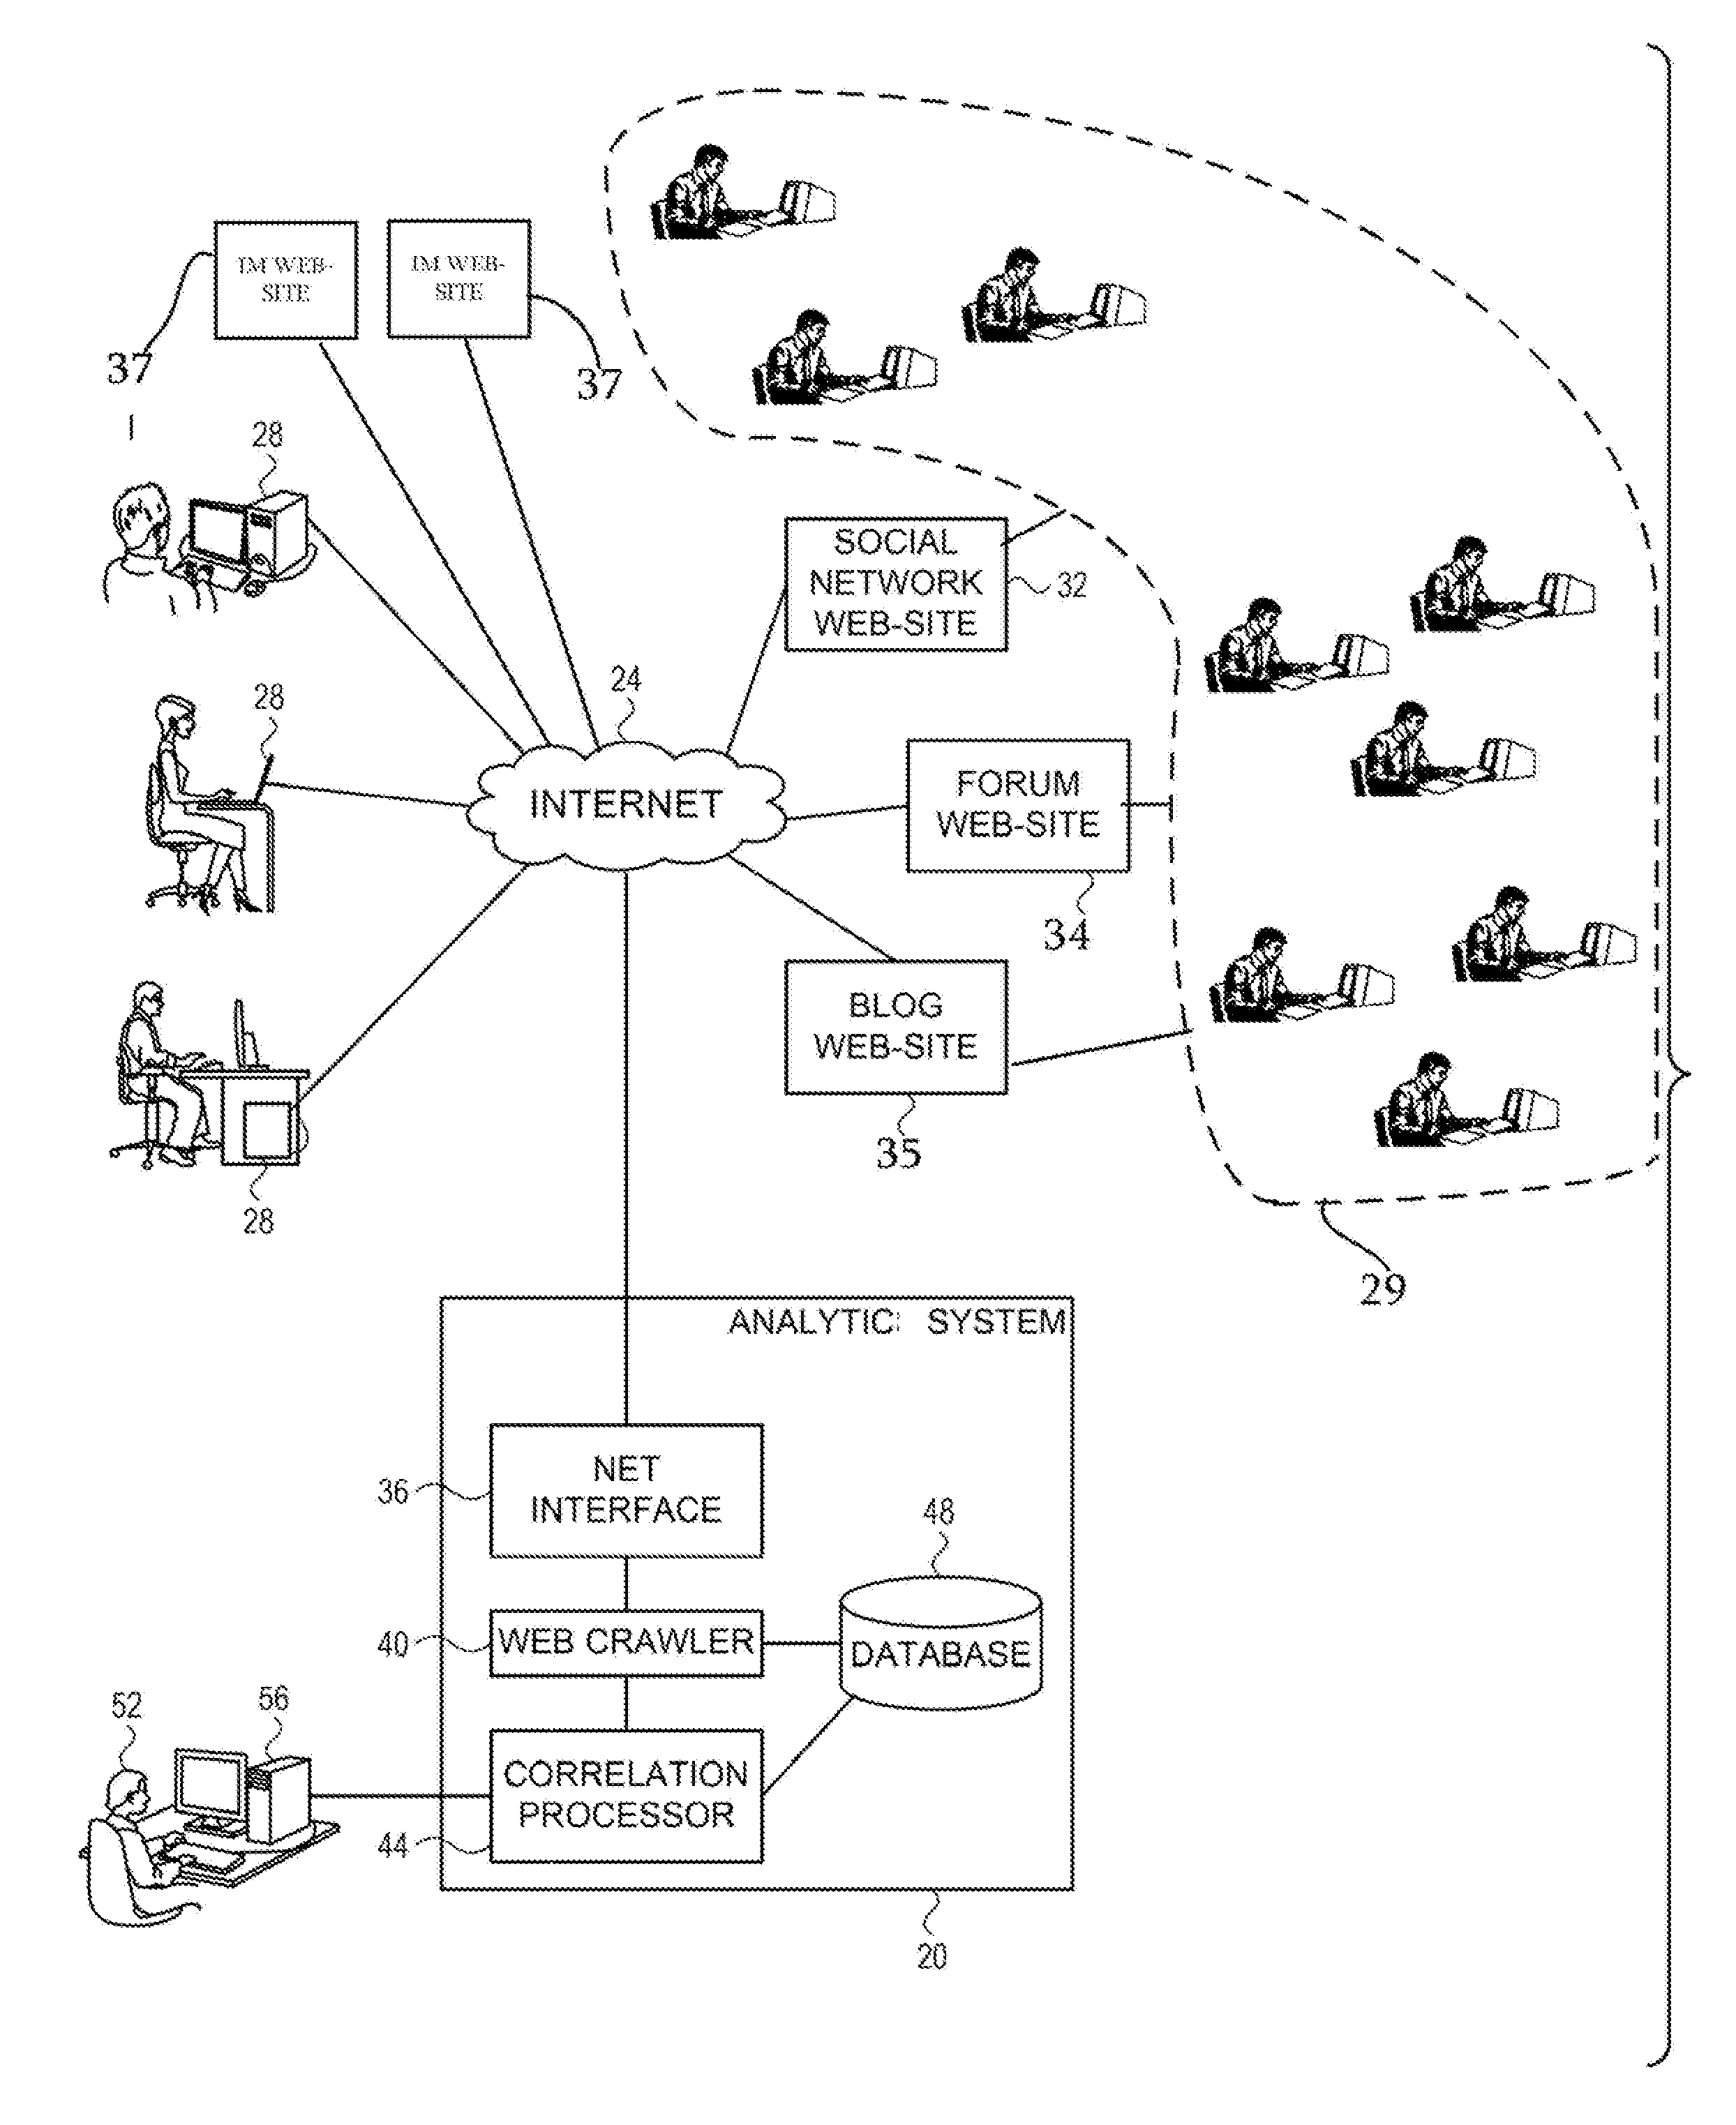 System and Method for Target Profiling Using Social Network Analysis